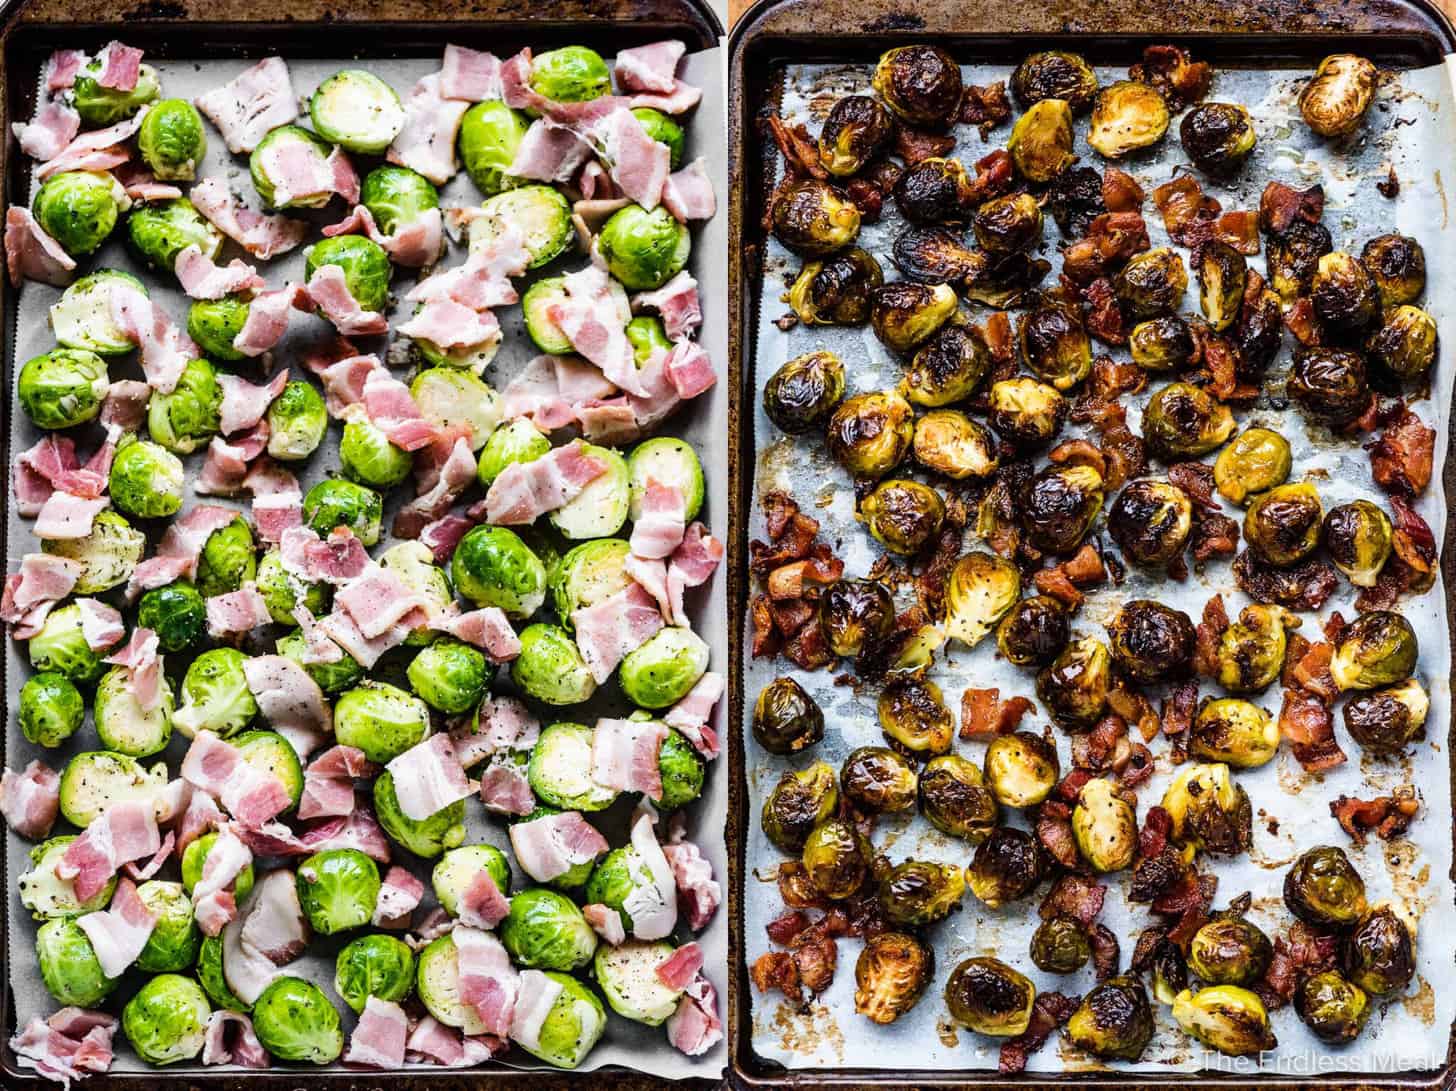 2 pictures showing before and after pictures of the roasted brussels uncooked and cooked. 